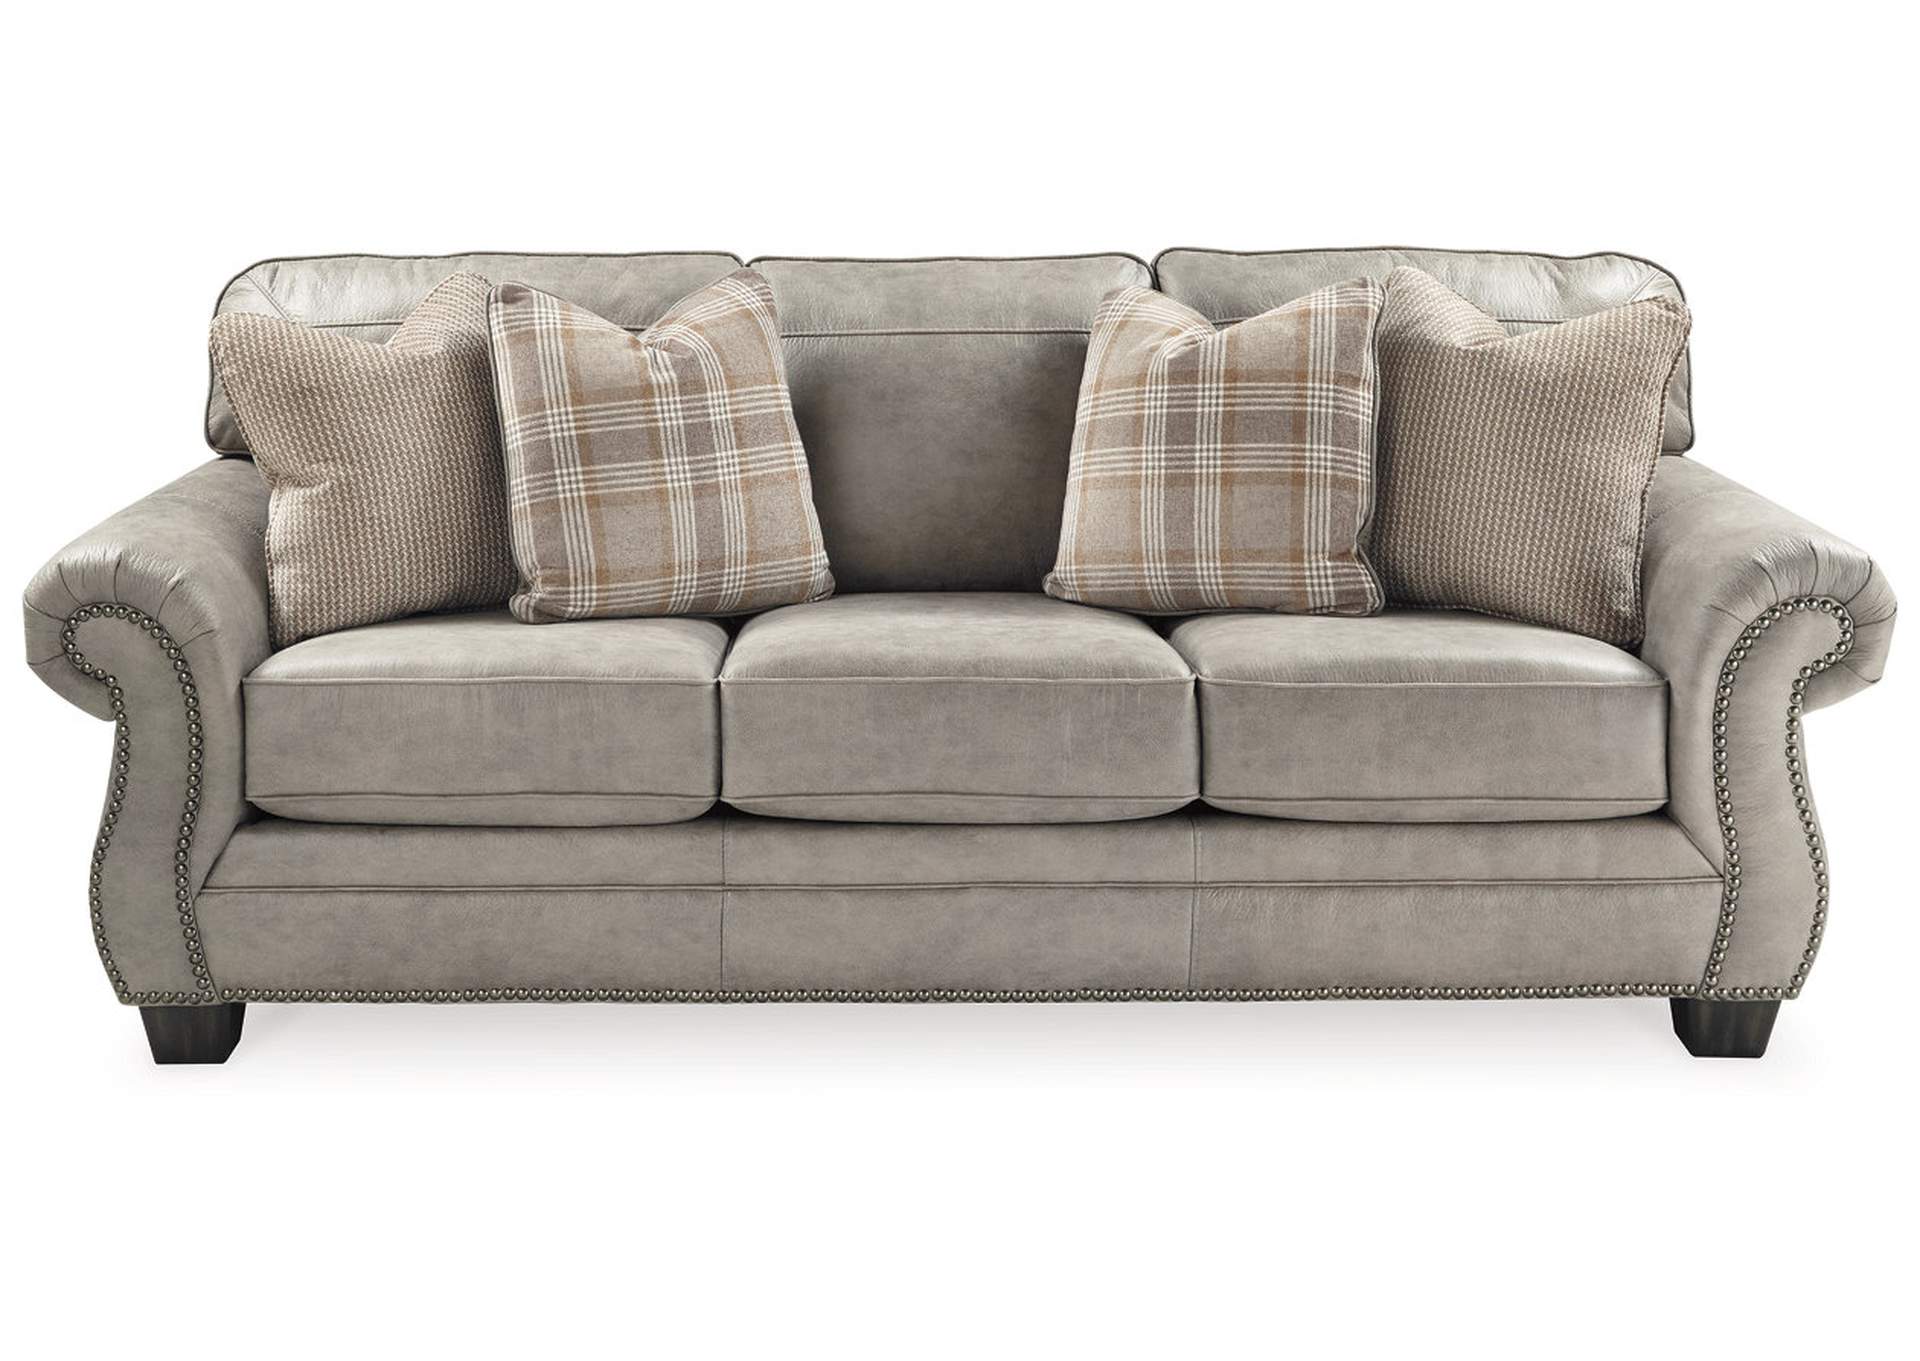 Olsberg Sofa and Loveseat with Chair and Ottoman,Signature Design By Ashley